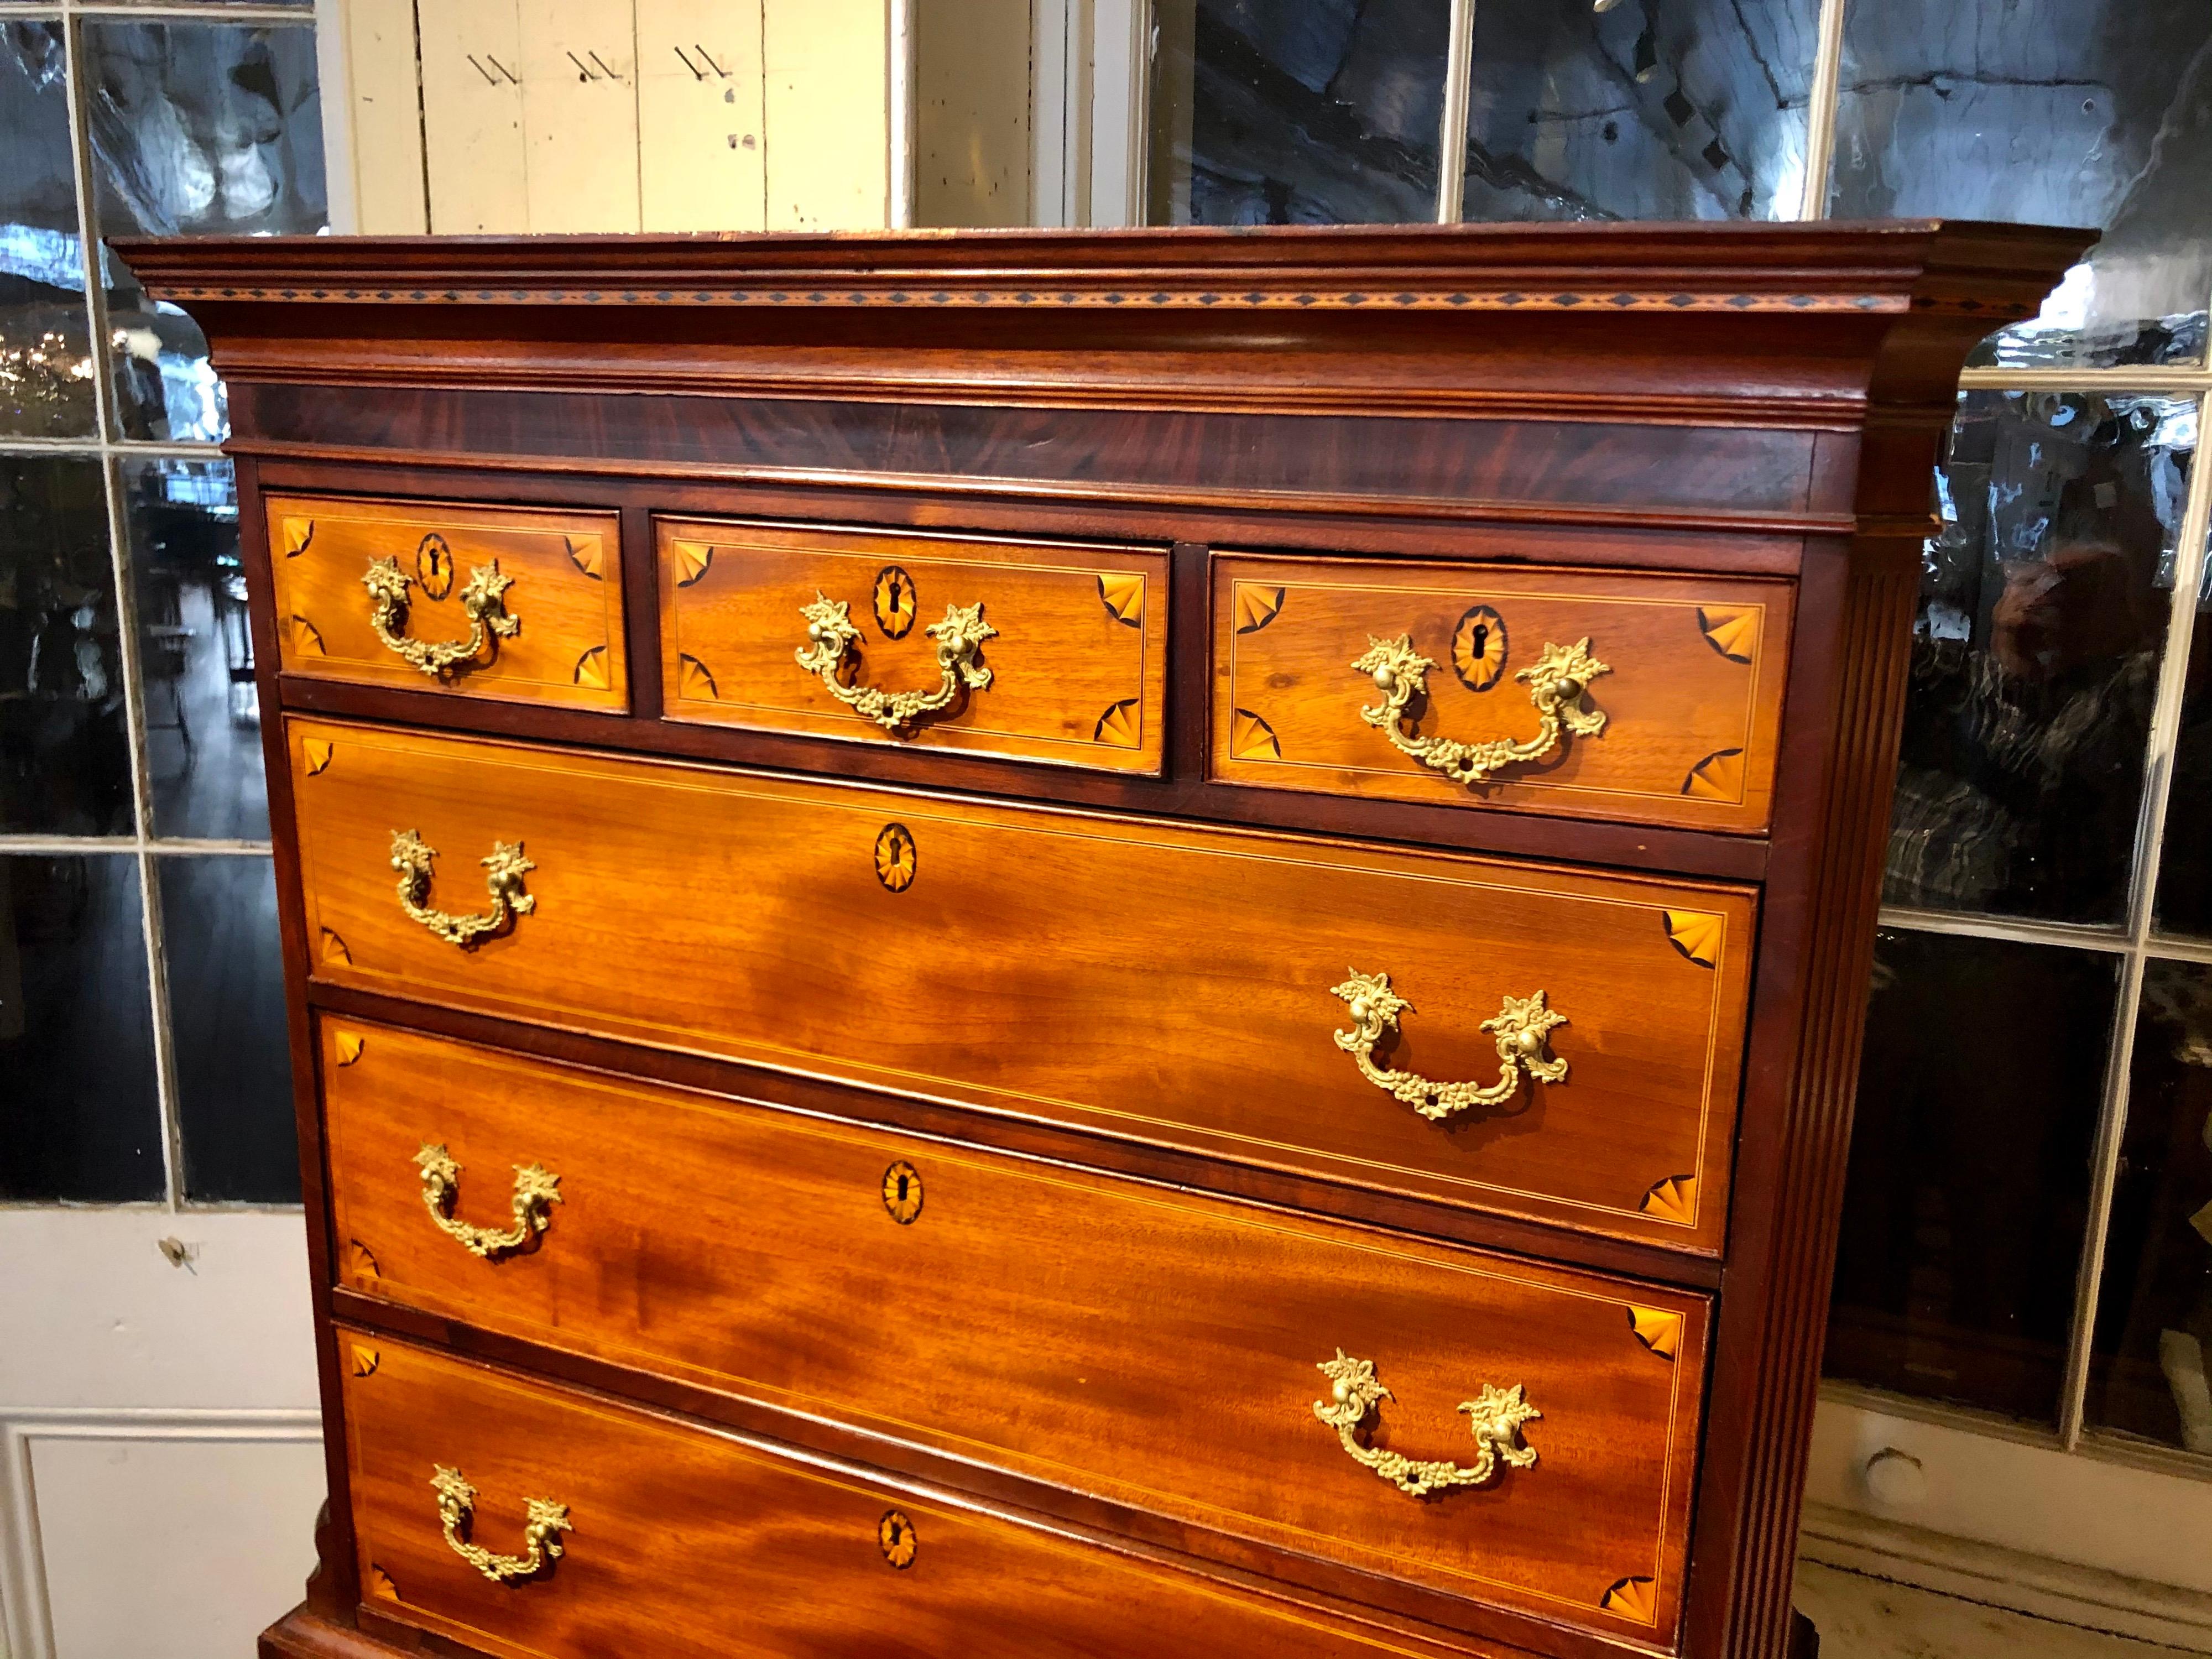 One of the finest quality Antique English Geo. III period inlaid figured mahogany Chippendale style Chests on Chests or Tallboys we have had in years. With superlative marquetry inlays of satinwood quarter fans on the perimeter of each drawer as